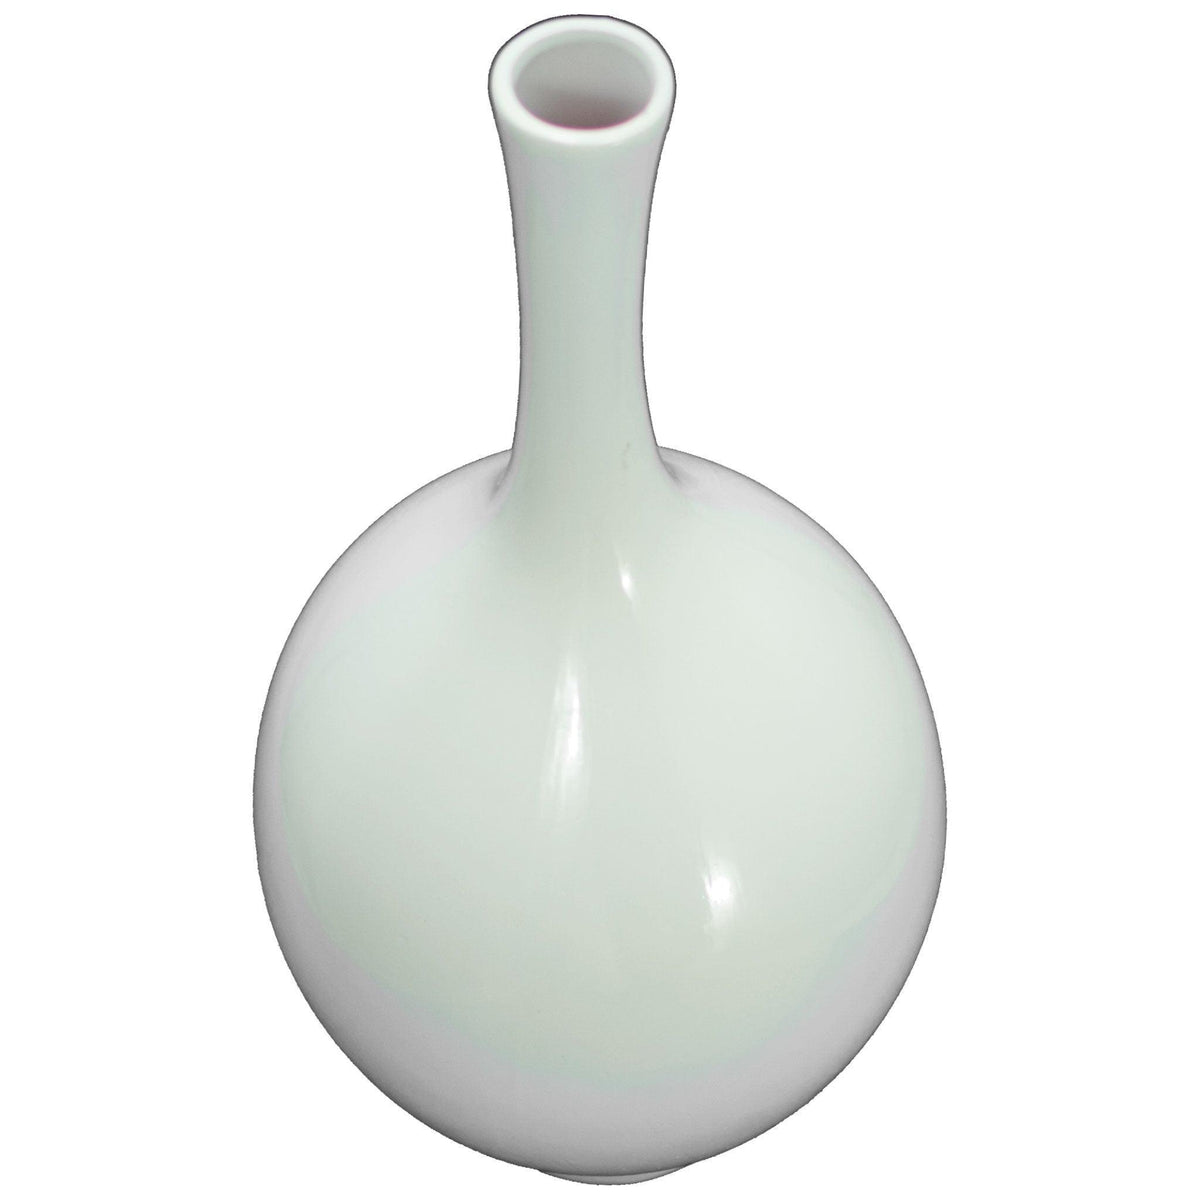 Lee Display's brand new 16in Modern Ceramic Vase comes in a high gloss white finish on sale at leedisplay.com